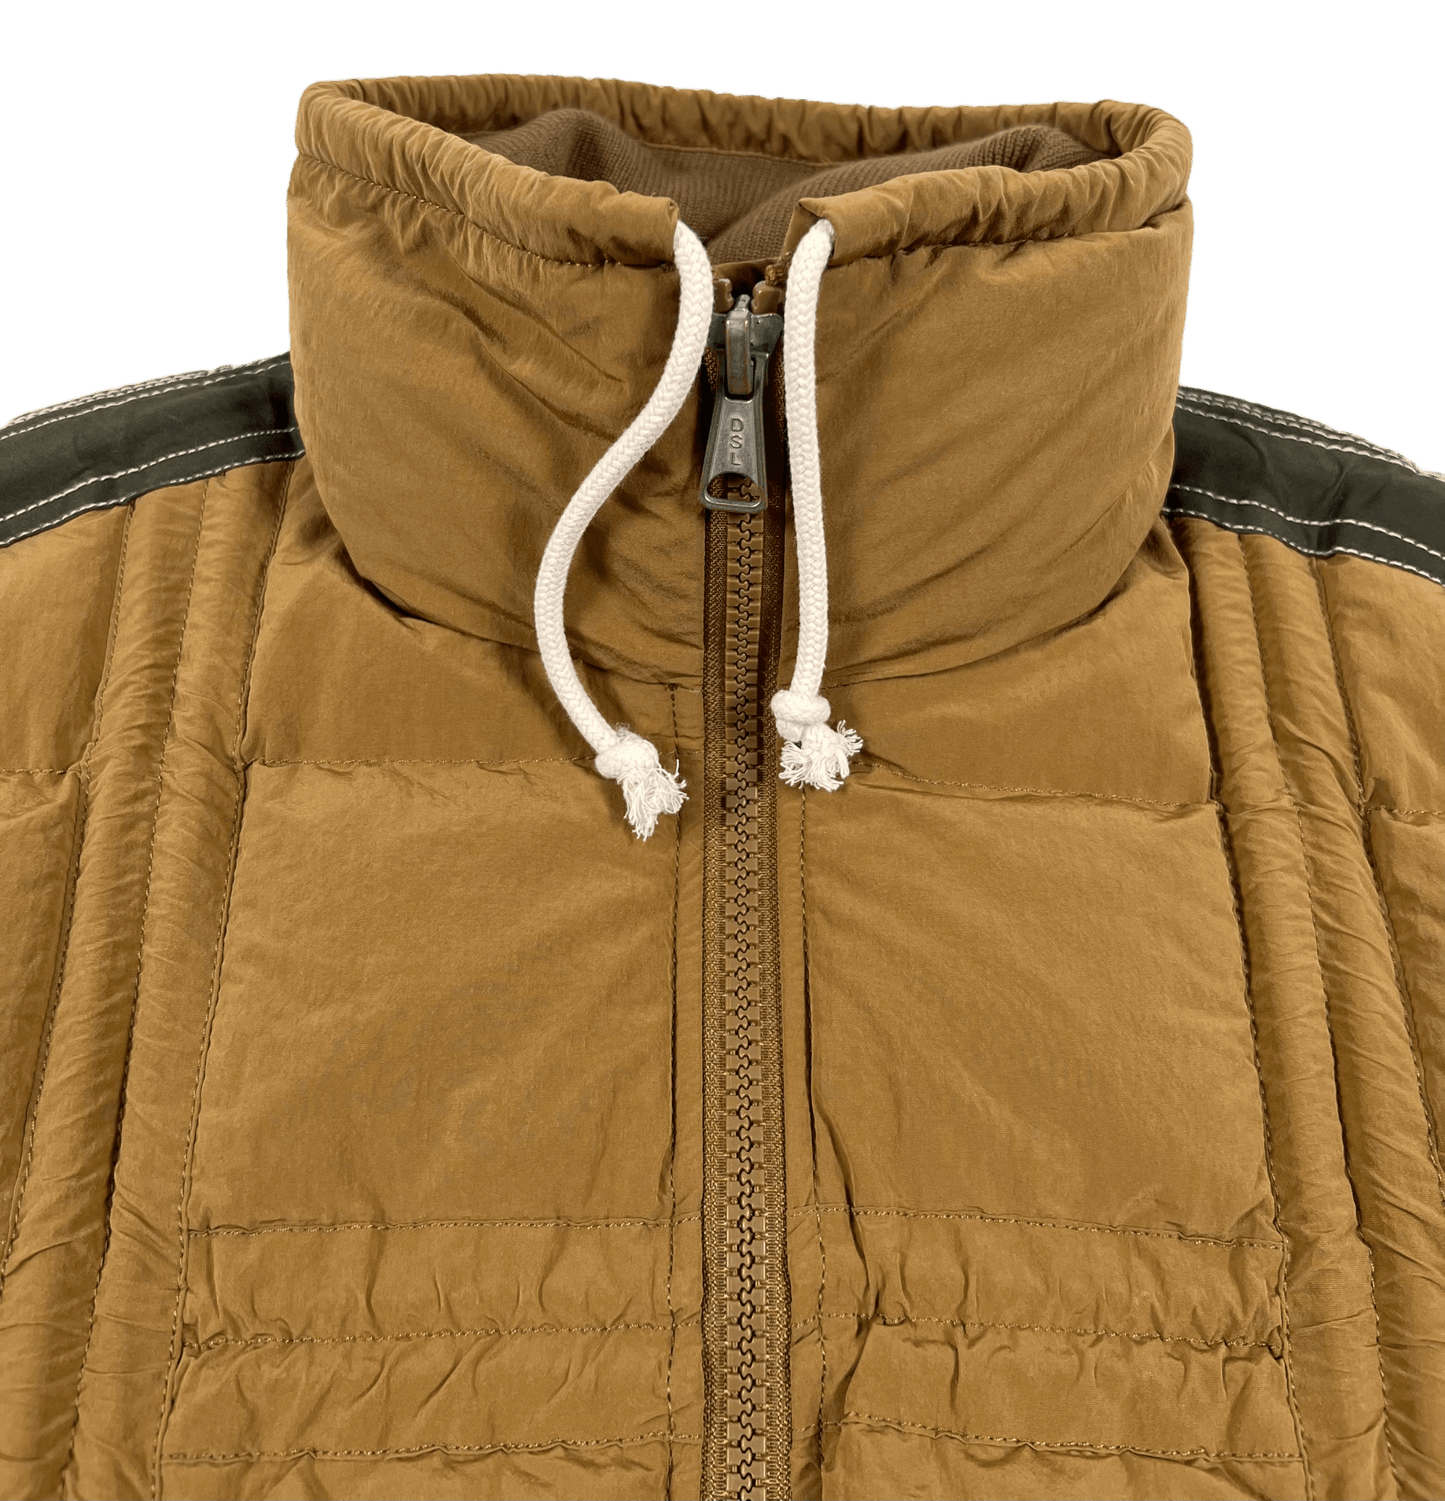 A tan, water-repellent DIESEL W-ERIC JACKET SPONGE with a zipper on the side.